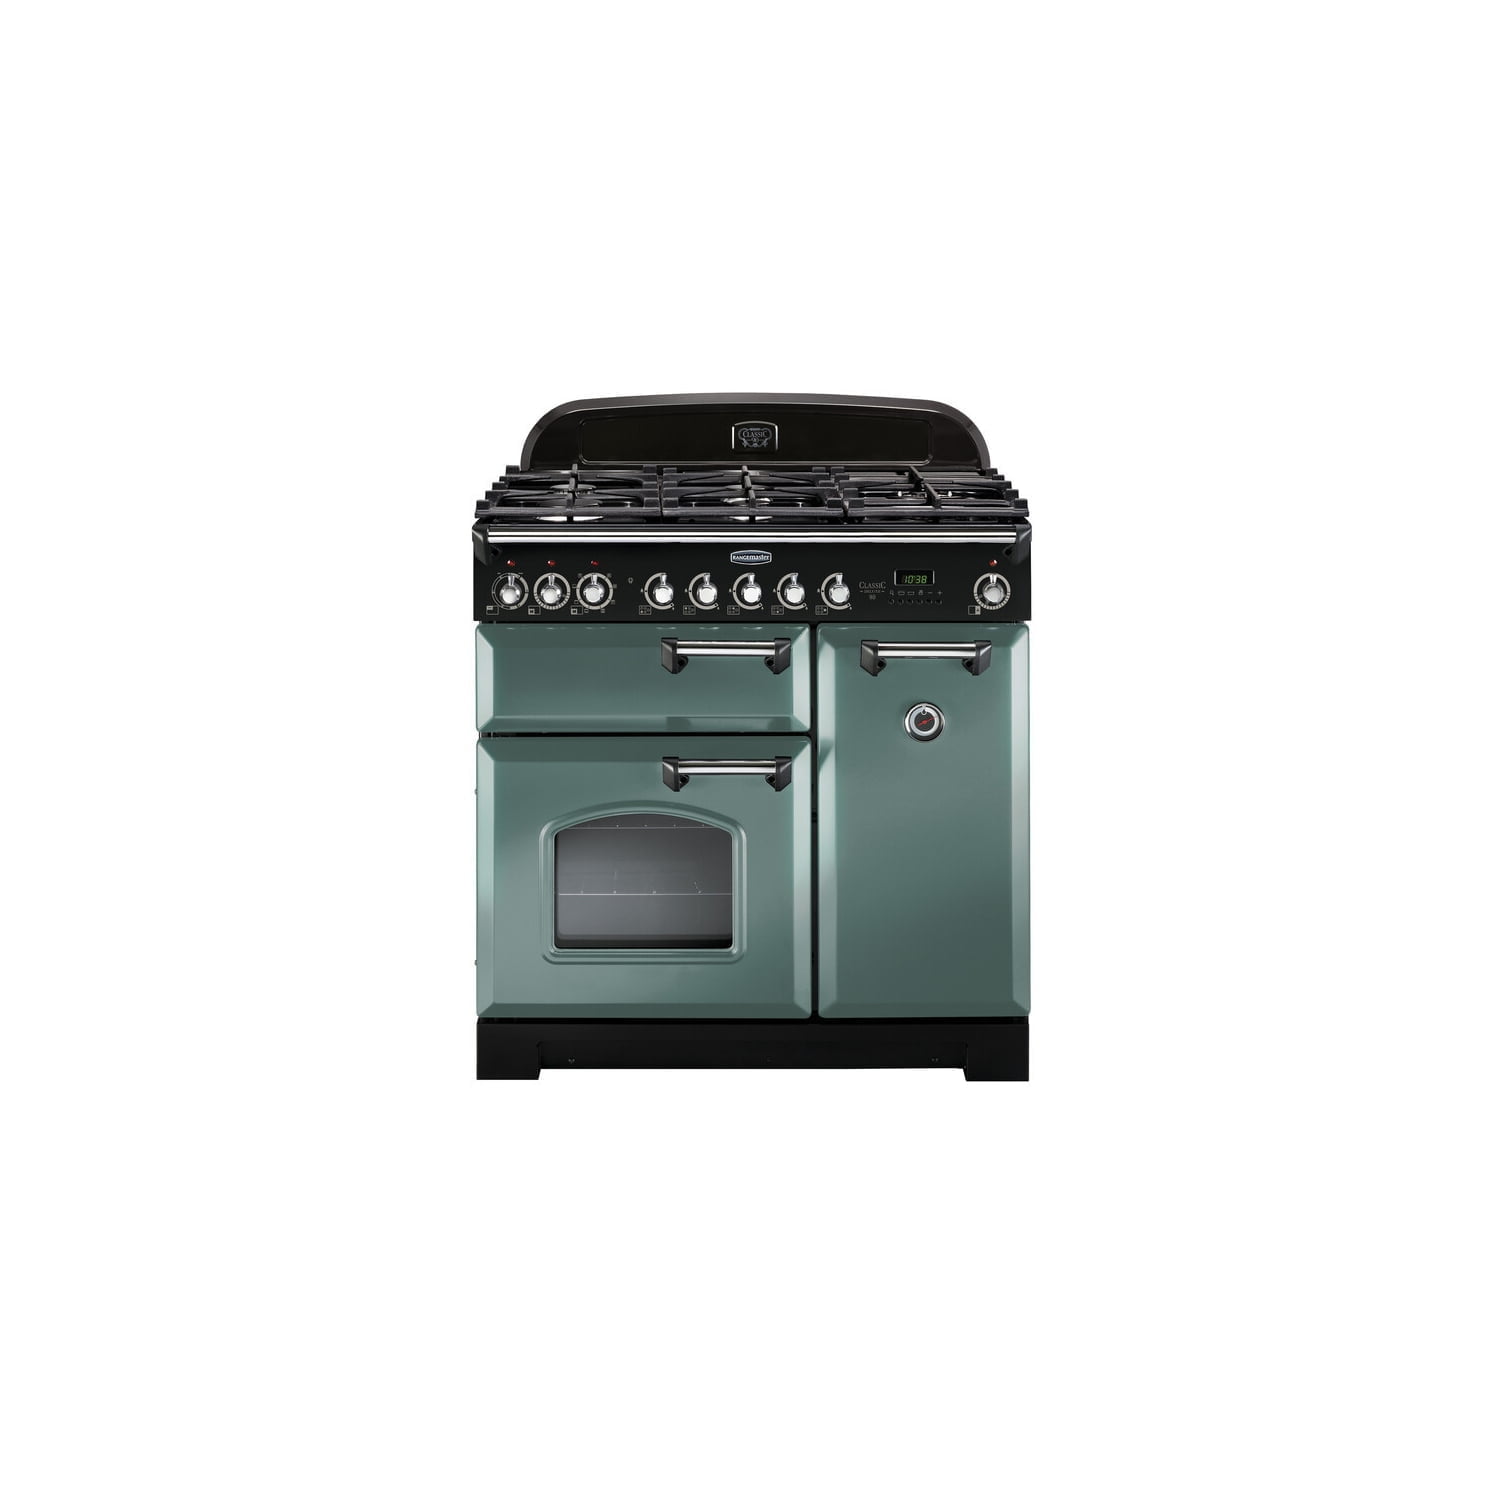 Rangemaster CDL90DFFMG/C Classic Deluxe Mineral Green with Chrome Trim 90cm Dual Fuel Range Cooker